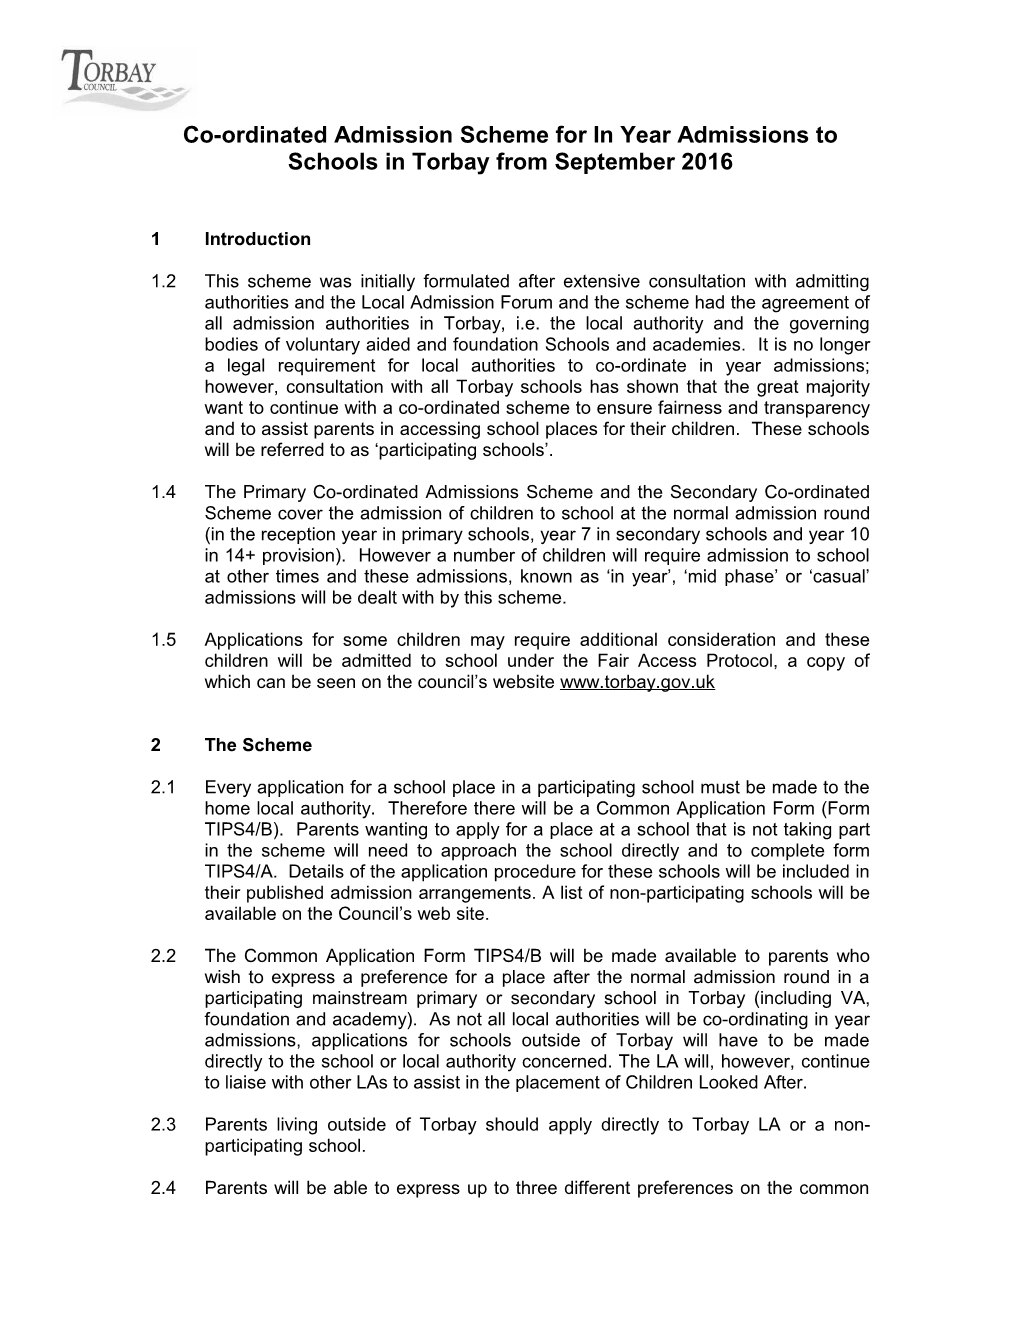 Co-Ordinated Admissions Scheme for Primary Schools in Torbay in September 2013